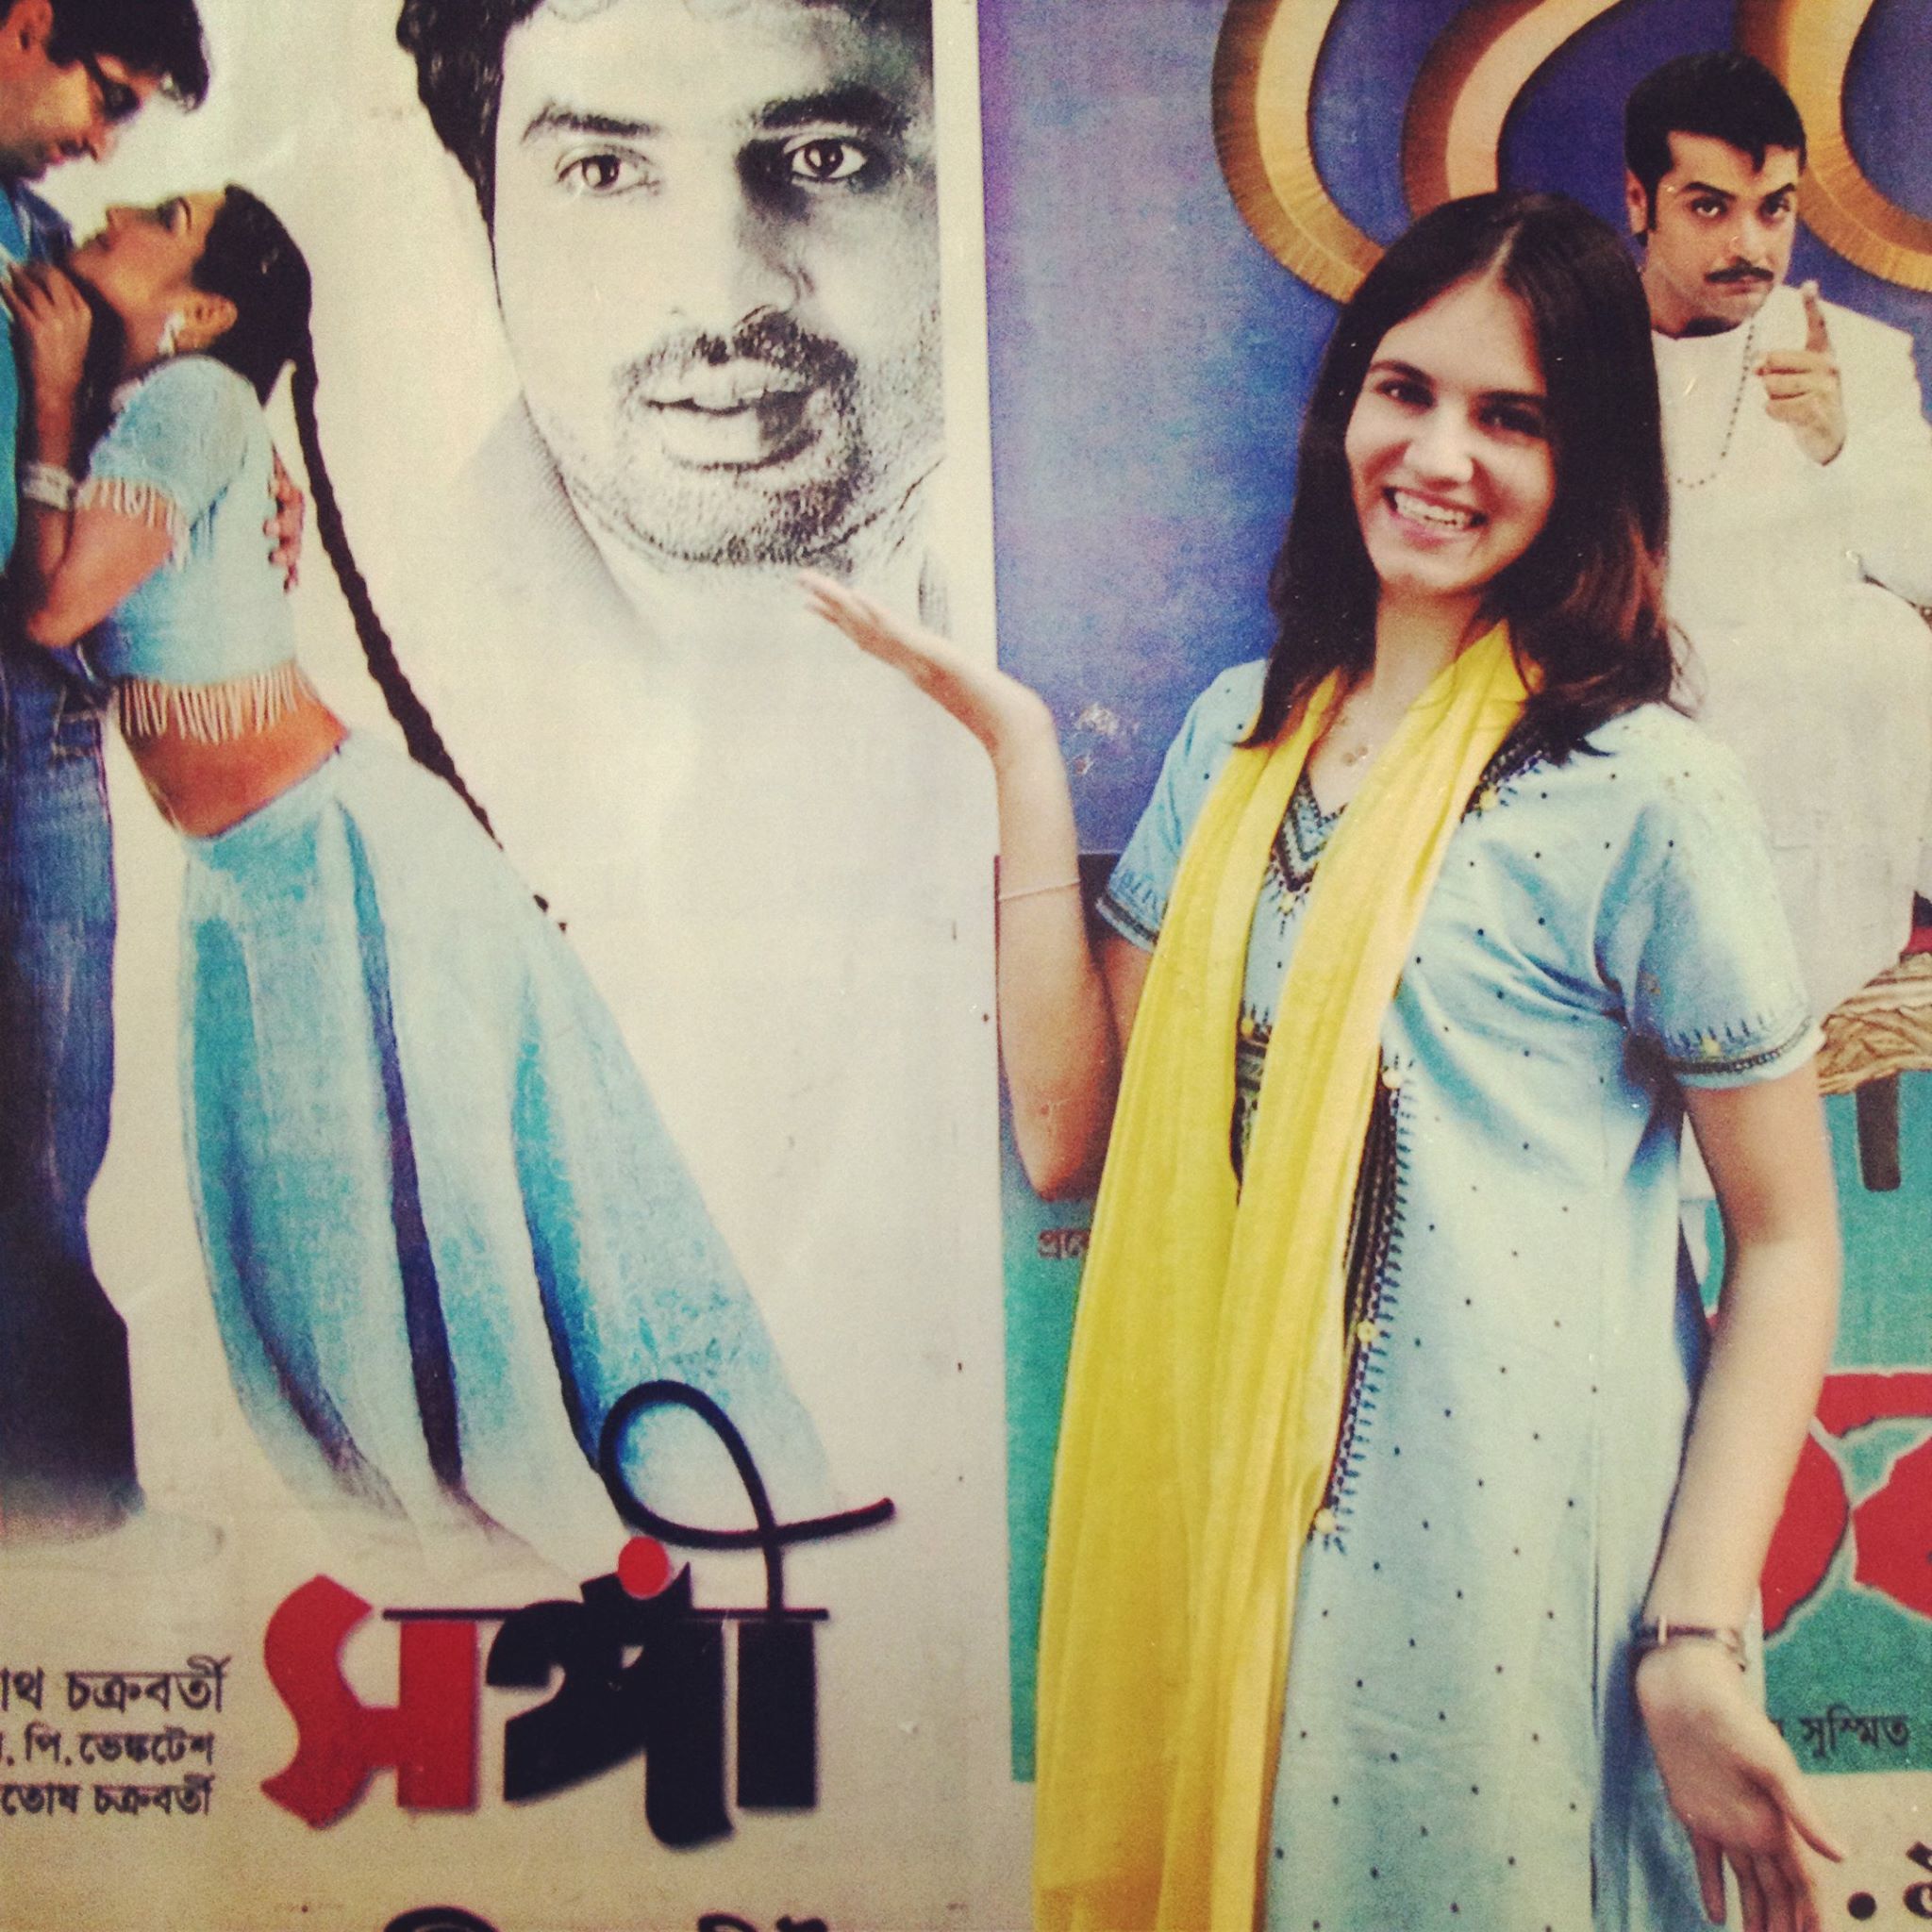 photo with Bollywood posters